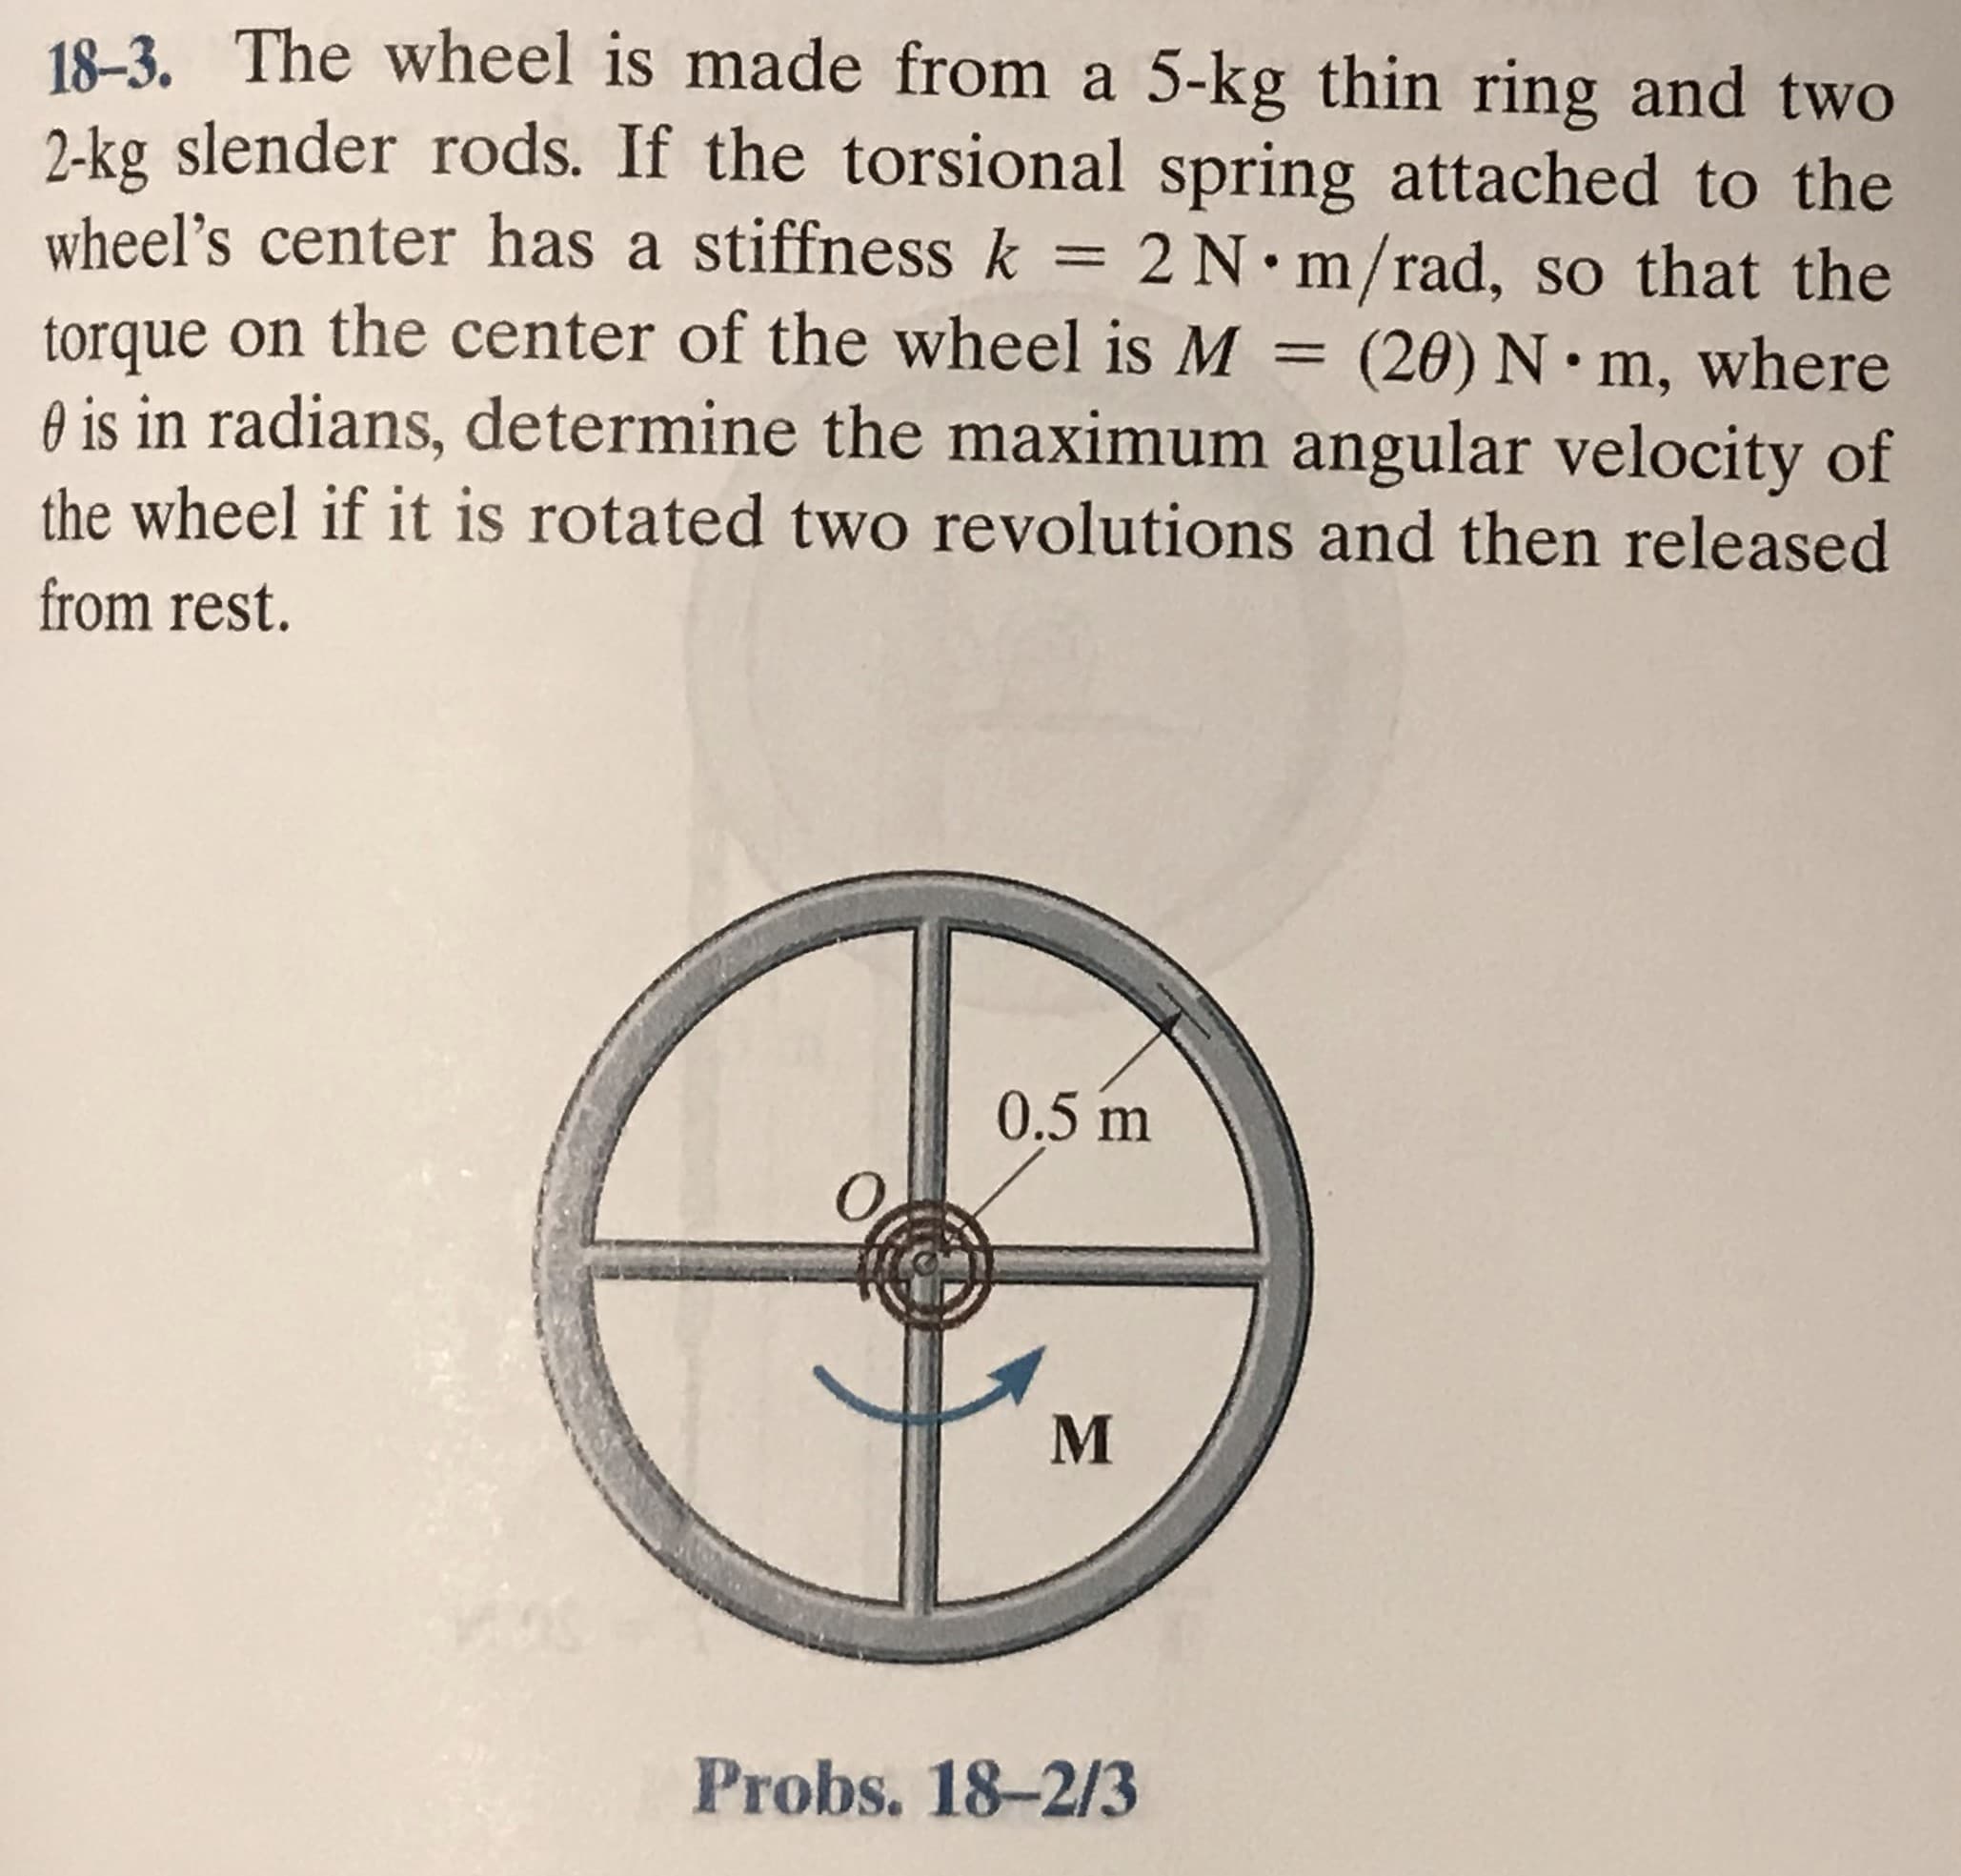 18-3. The wheel is made from a 5-kg thin ring and two
2-kg slender rods. If the torsional spring attached to the
wheel’s center has a stiffness k = 2 N m/rad, so that the
torque on the center of the wheel is M
O is in radians, determine the maximum angular velocity of
%3D
(20) N• m, where
the wheel if it is rotated two revolutions and then released
from rest.
0.5 m
Probs. 18-2/3
